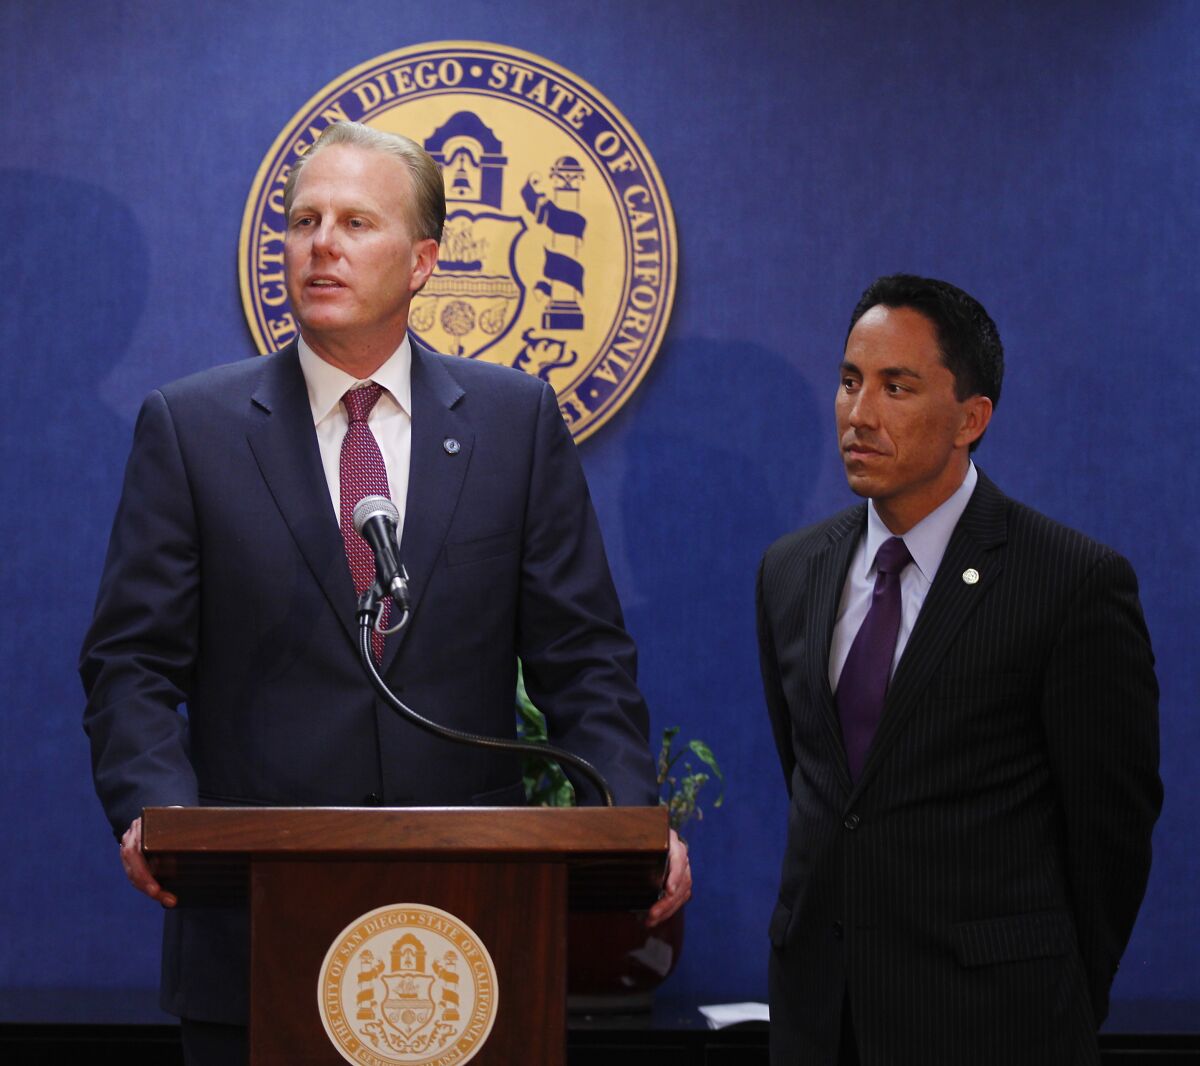 Mayor-elect Kevin Faulconer appeared with then-interim Mayor Todd Gloria in February 2014.